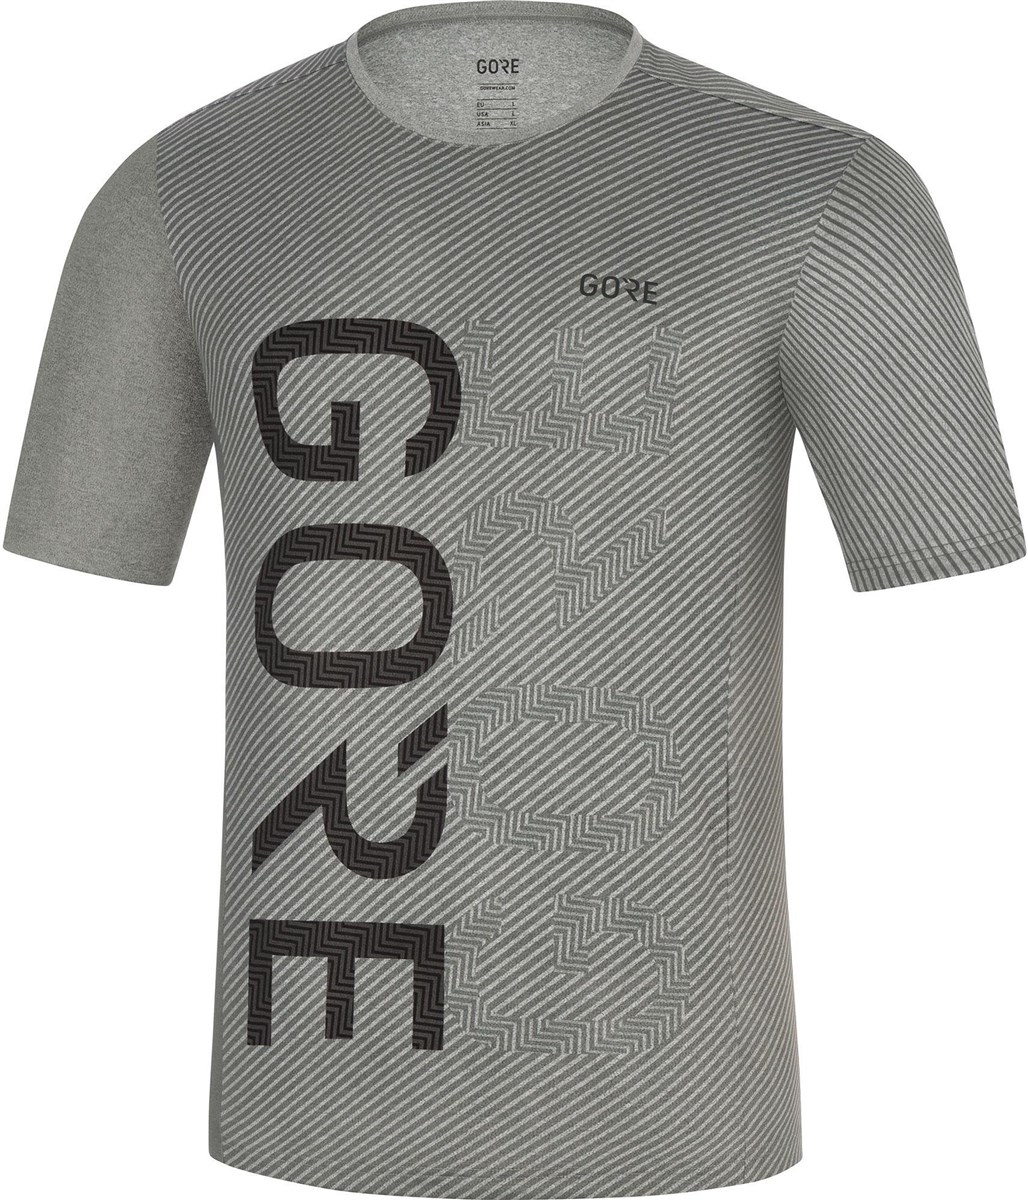 Gore Brand Tech Tee product image